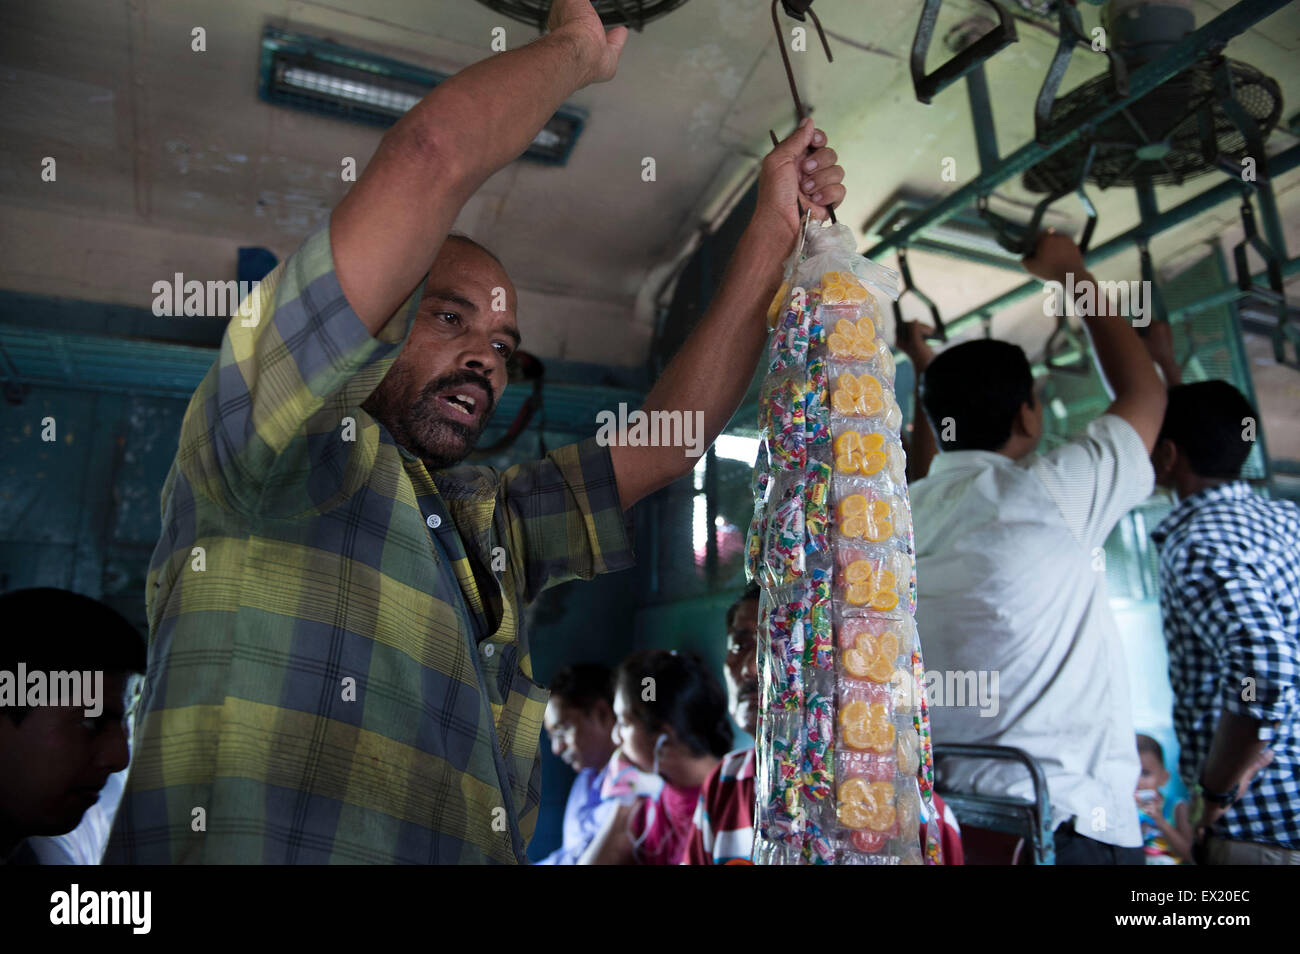 Kolkata, Indian state West Bengal. 4th July, 2015. An Indian hawker sells stuff on a train in Kolkata, capital of eastern Indian state West Bengal, July 4, 2015. India has released new socio-economic and caste census data which covers the period between 2011 and 2013 to show the wealth, living conditions and other details of the country's 1.2 billion people. Nearly one third are landless, and half derive their income mainly from manual labor. © Tumpa Mondal/Xinhua/Alamy Live News Stock Photo